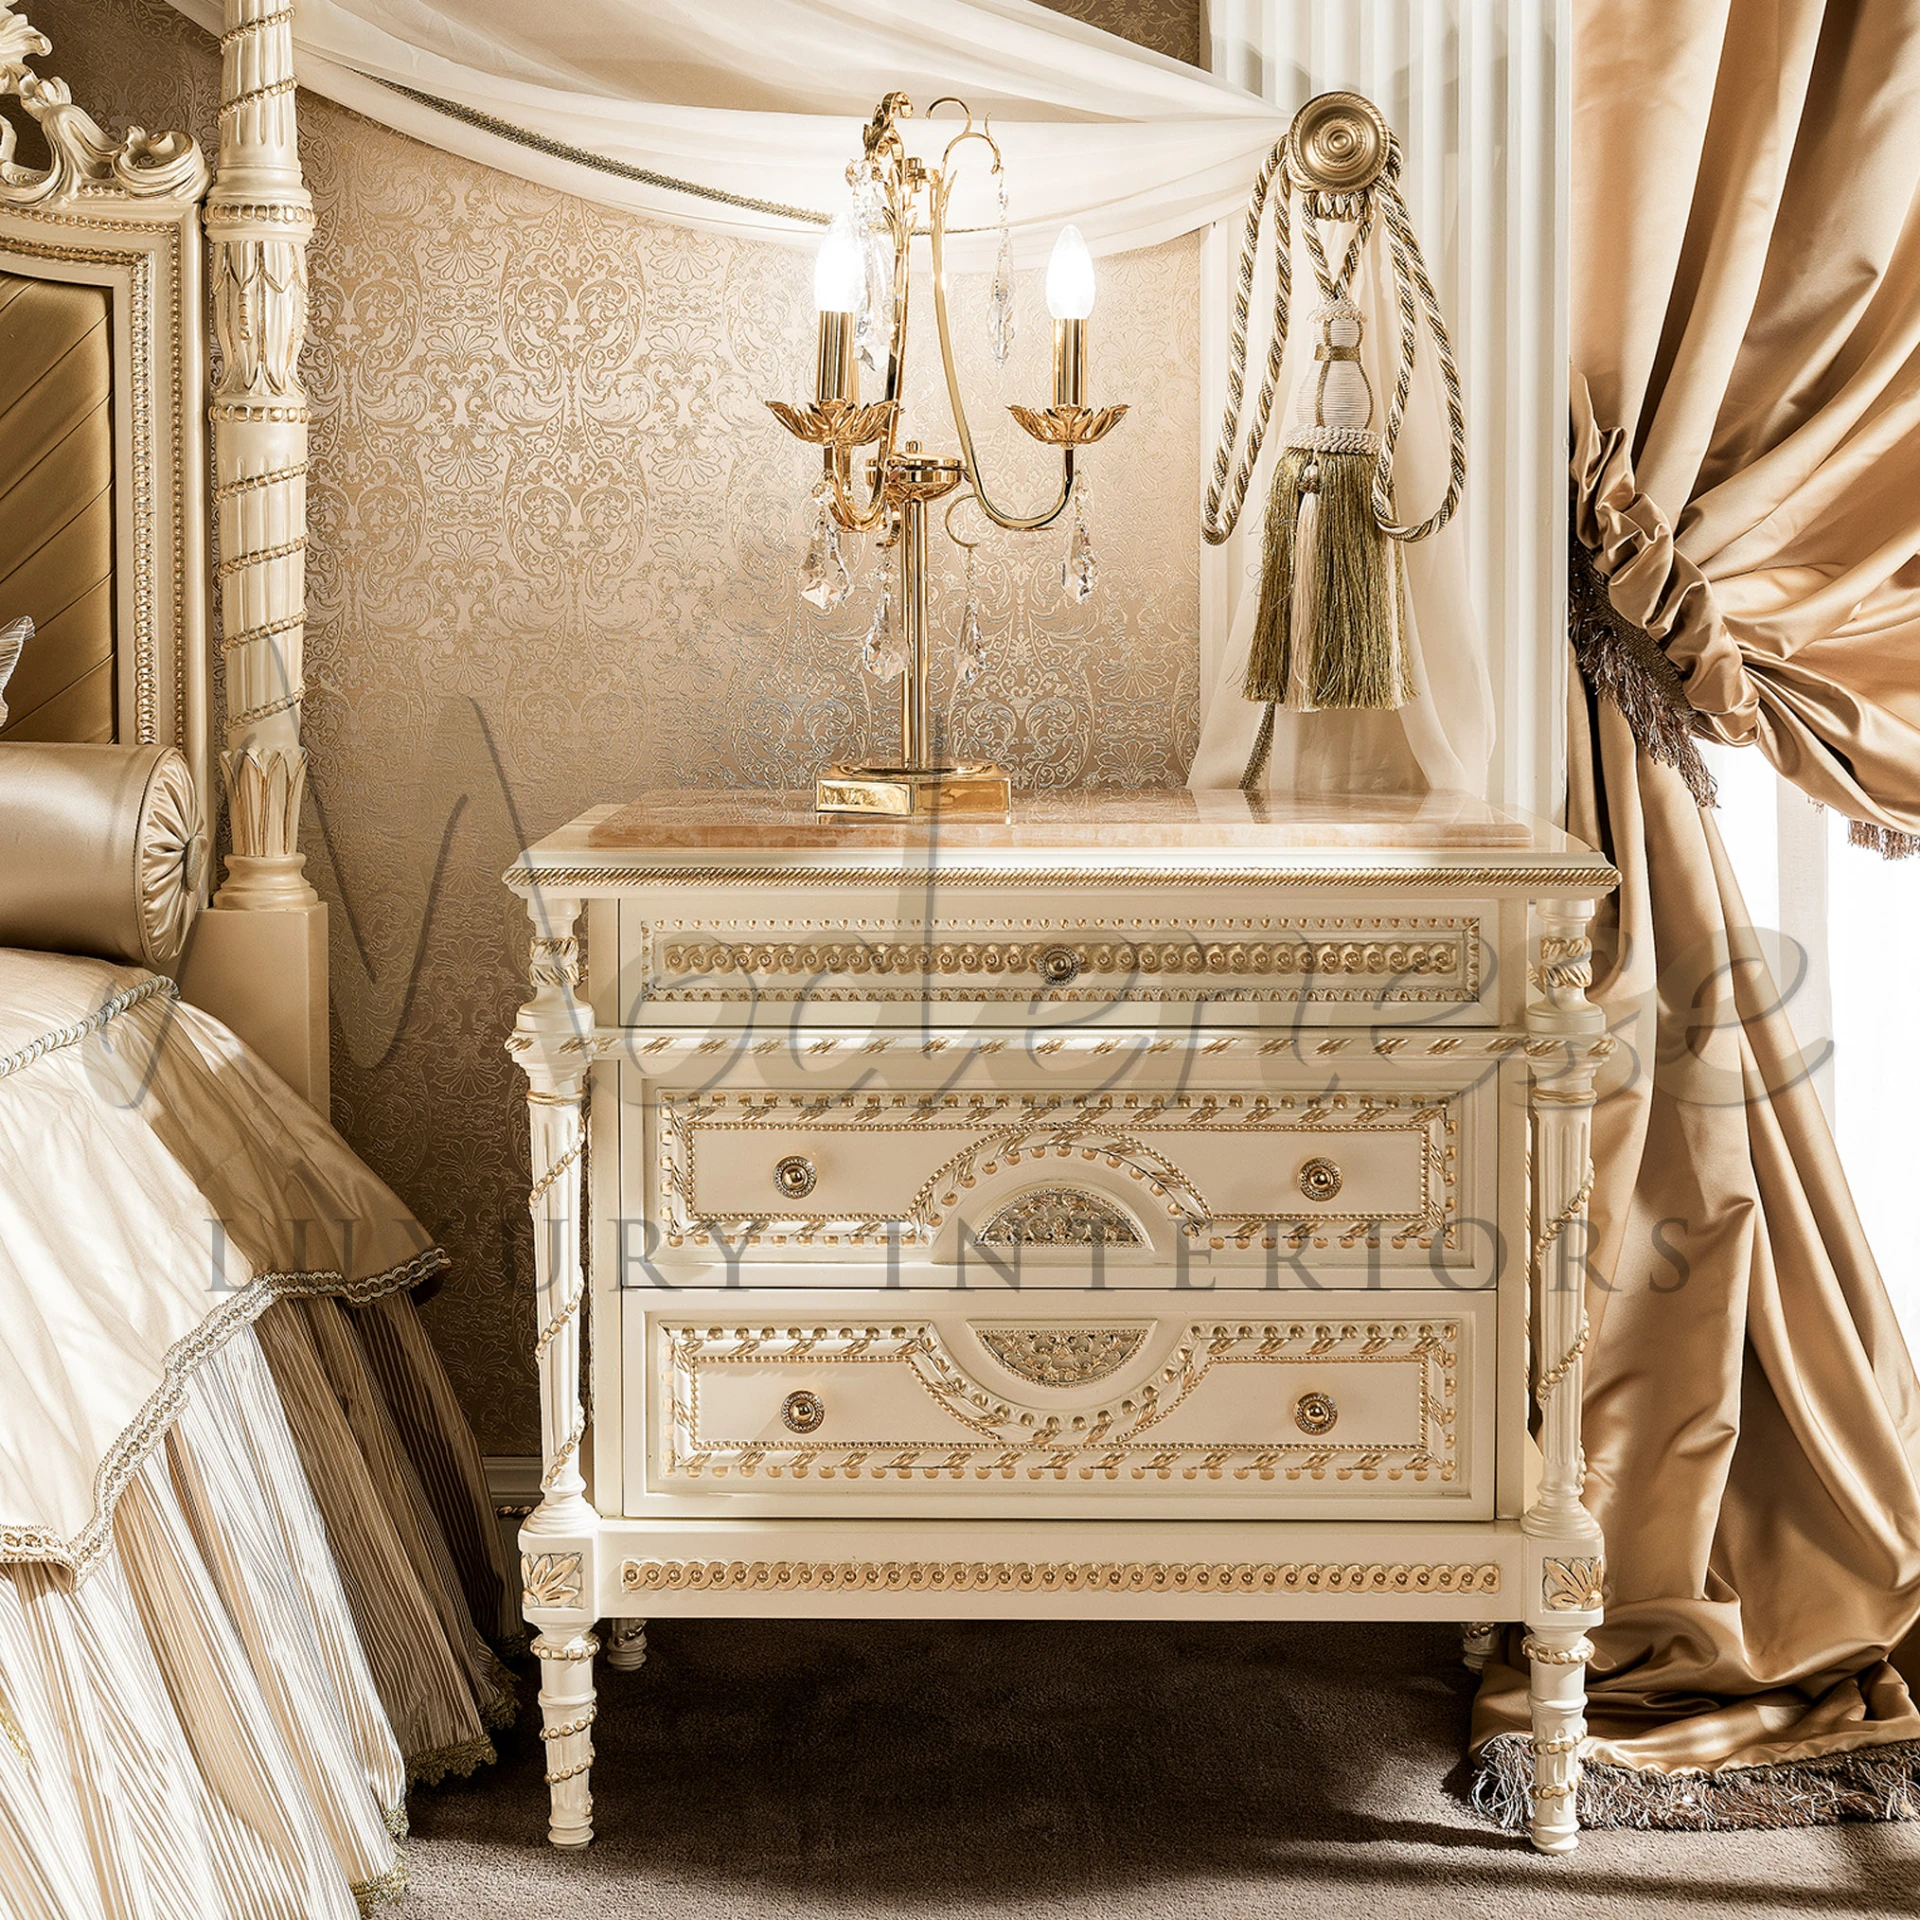 A luxurious cream-colored nightstand by Modenese Furniture, adorned with intricate gold detailing and a marble surface, placed alongside elegant drapery and a classic candelabra-style lamp.